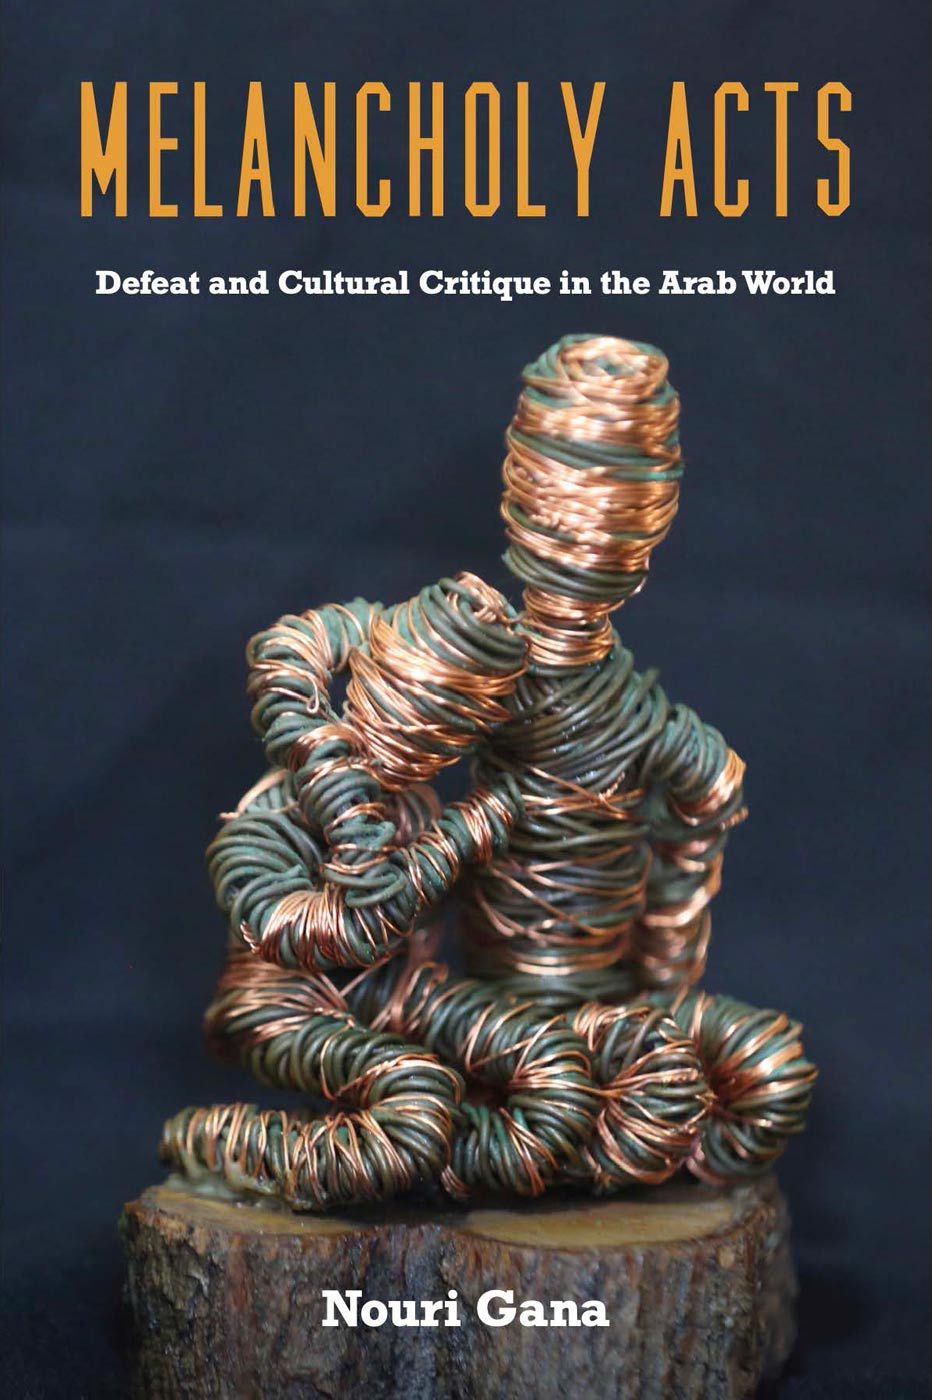 Book cover with white and yellow text over a photo of a sculpture of two wire figures on a wood base